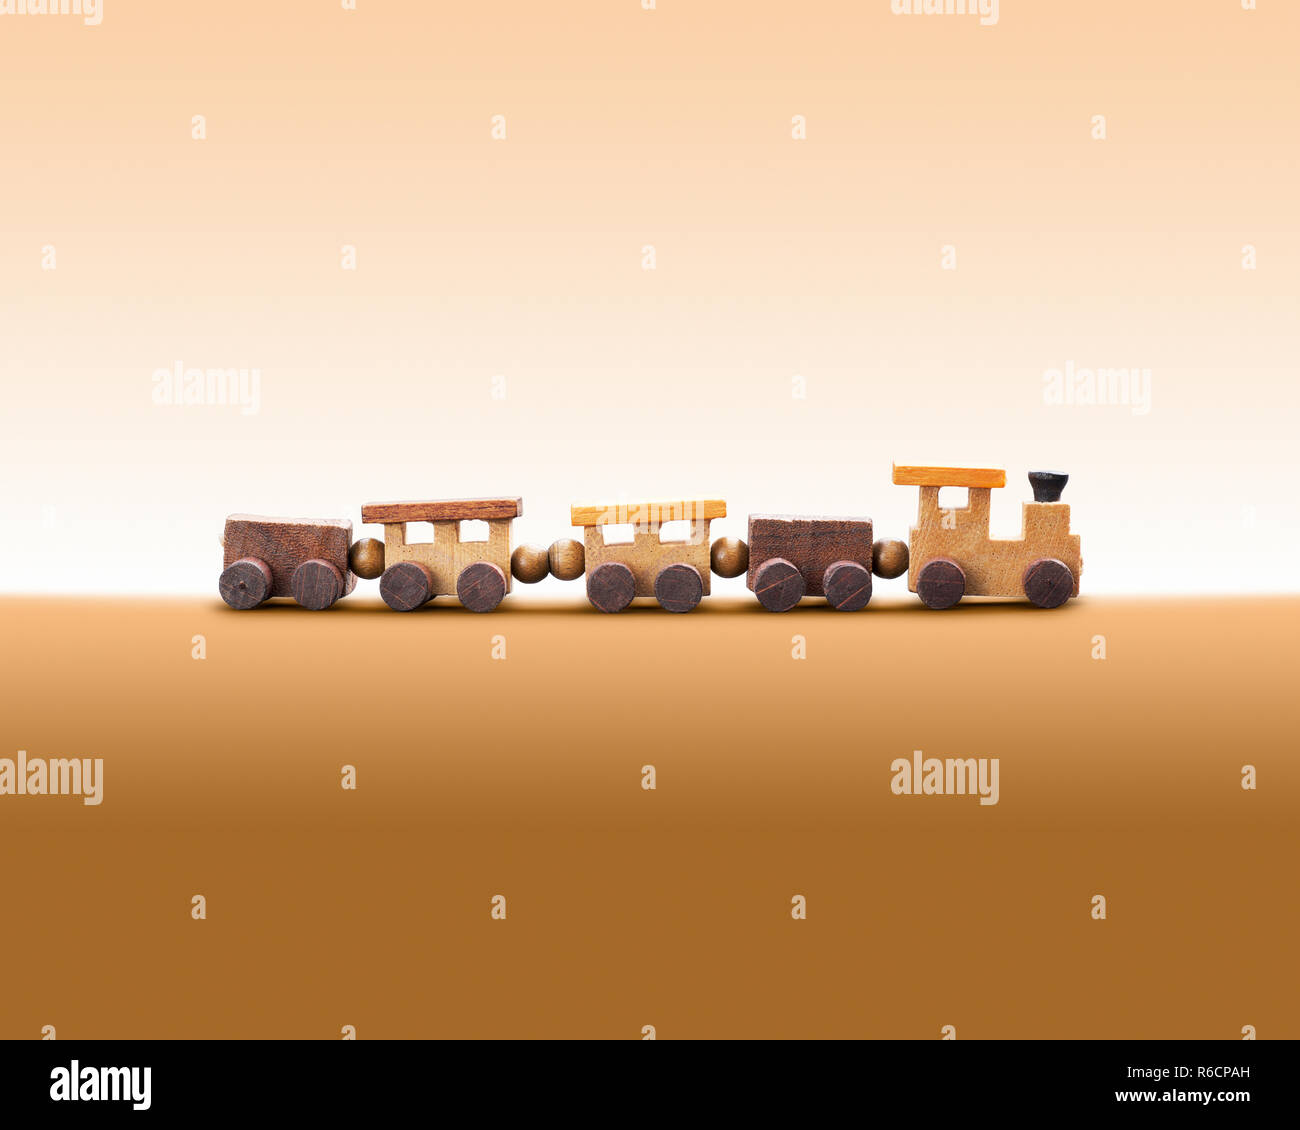 Natural wooden toy train against a plain background Stock Photo